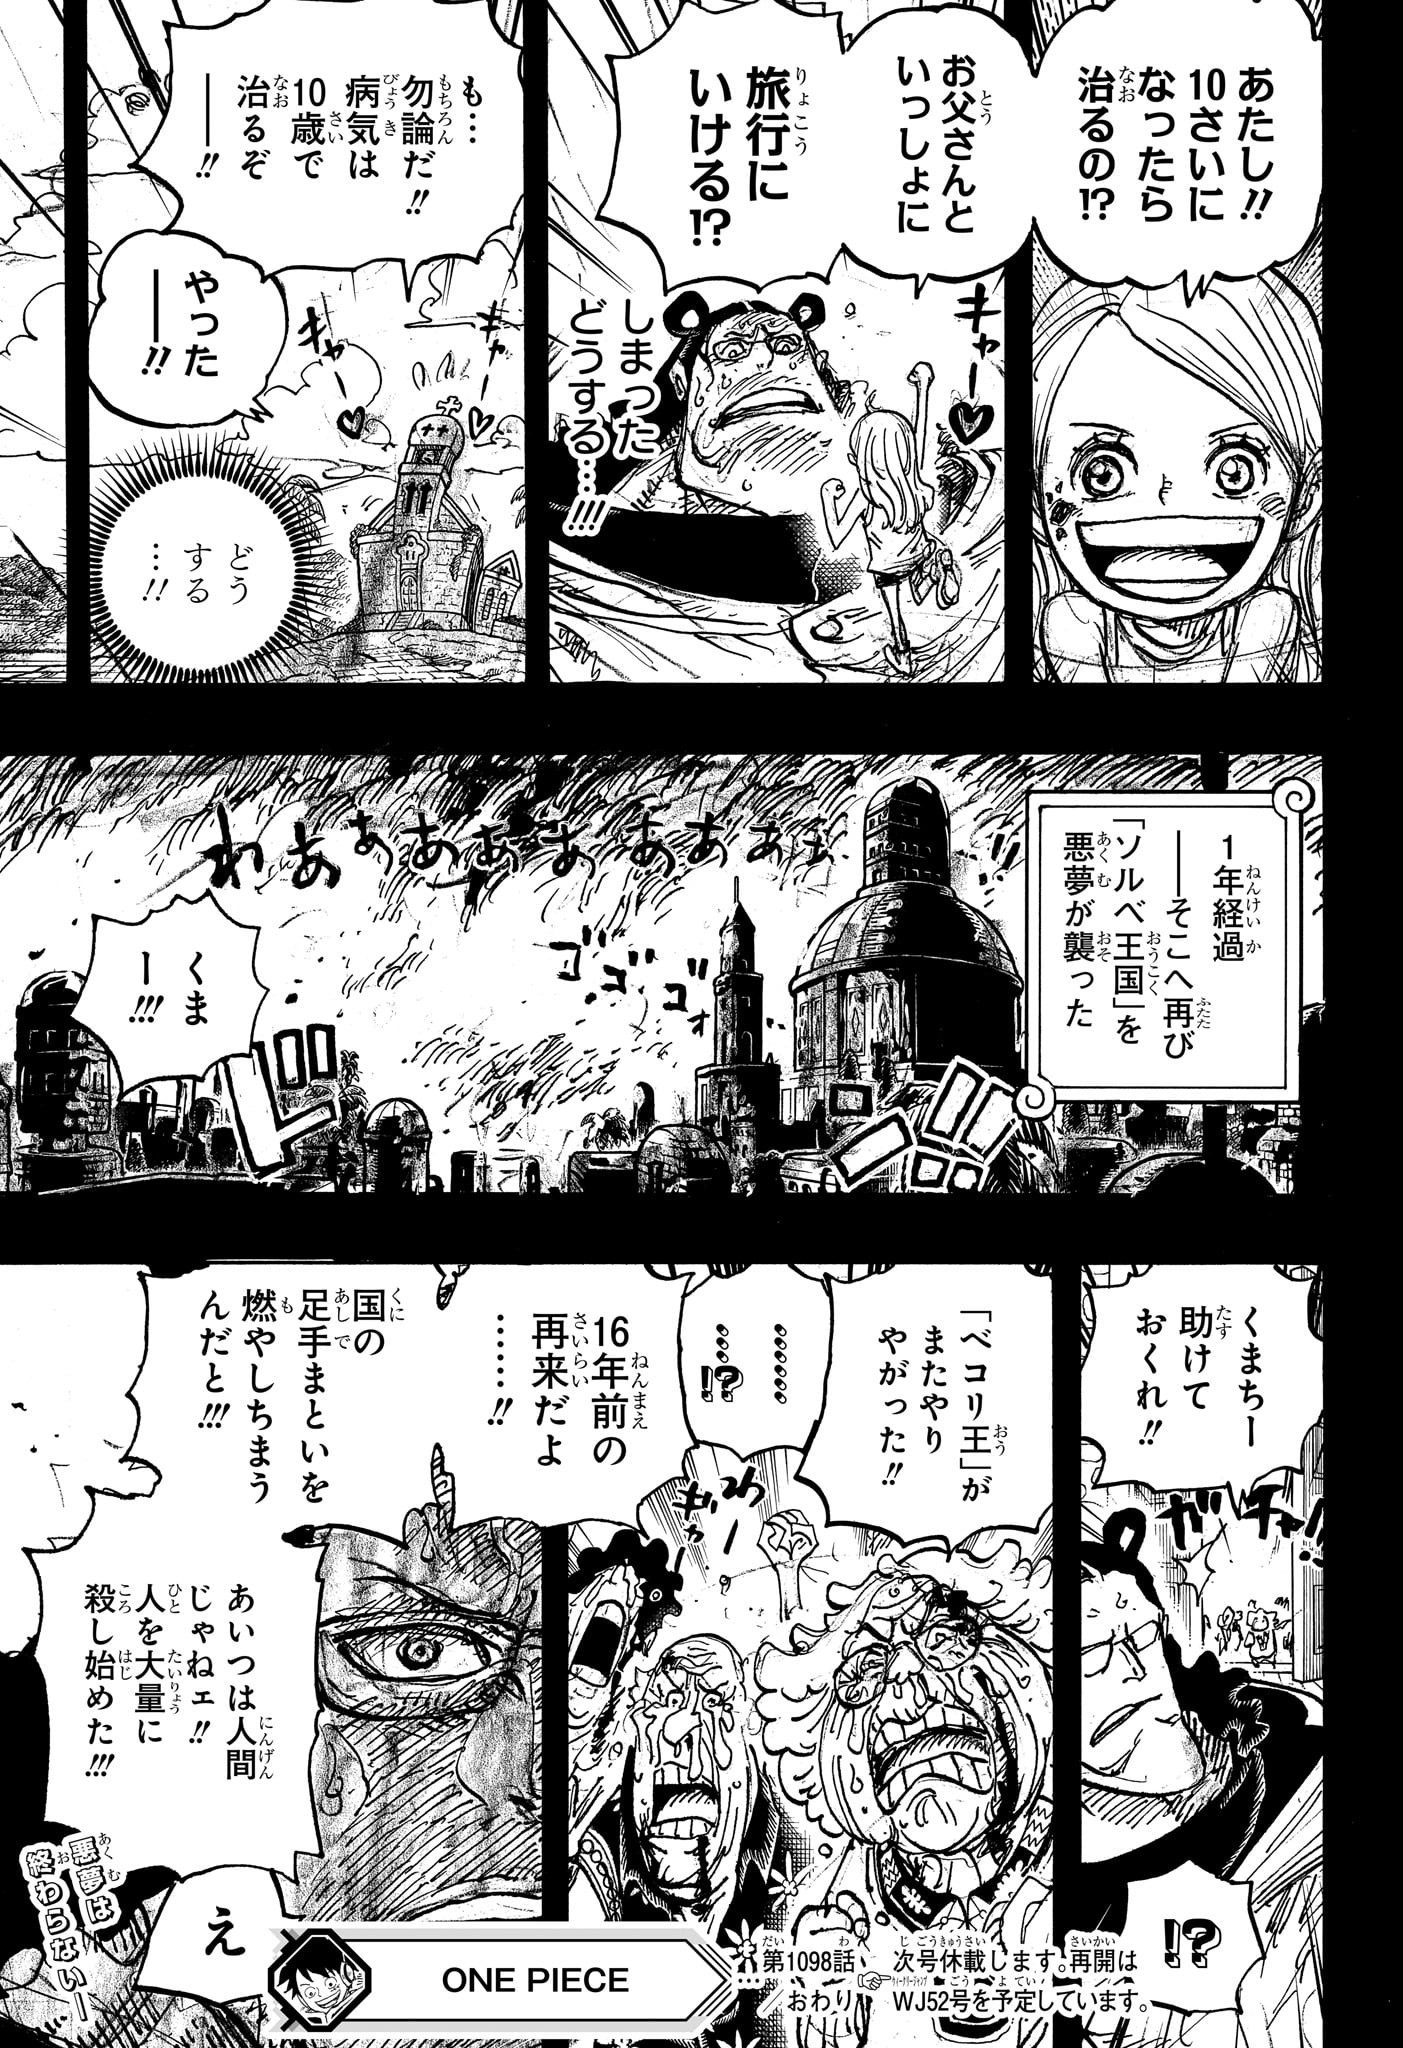 One Piece - Chapter 1098 - Page 15